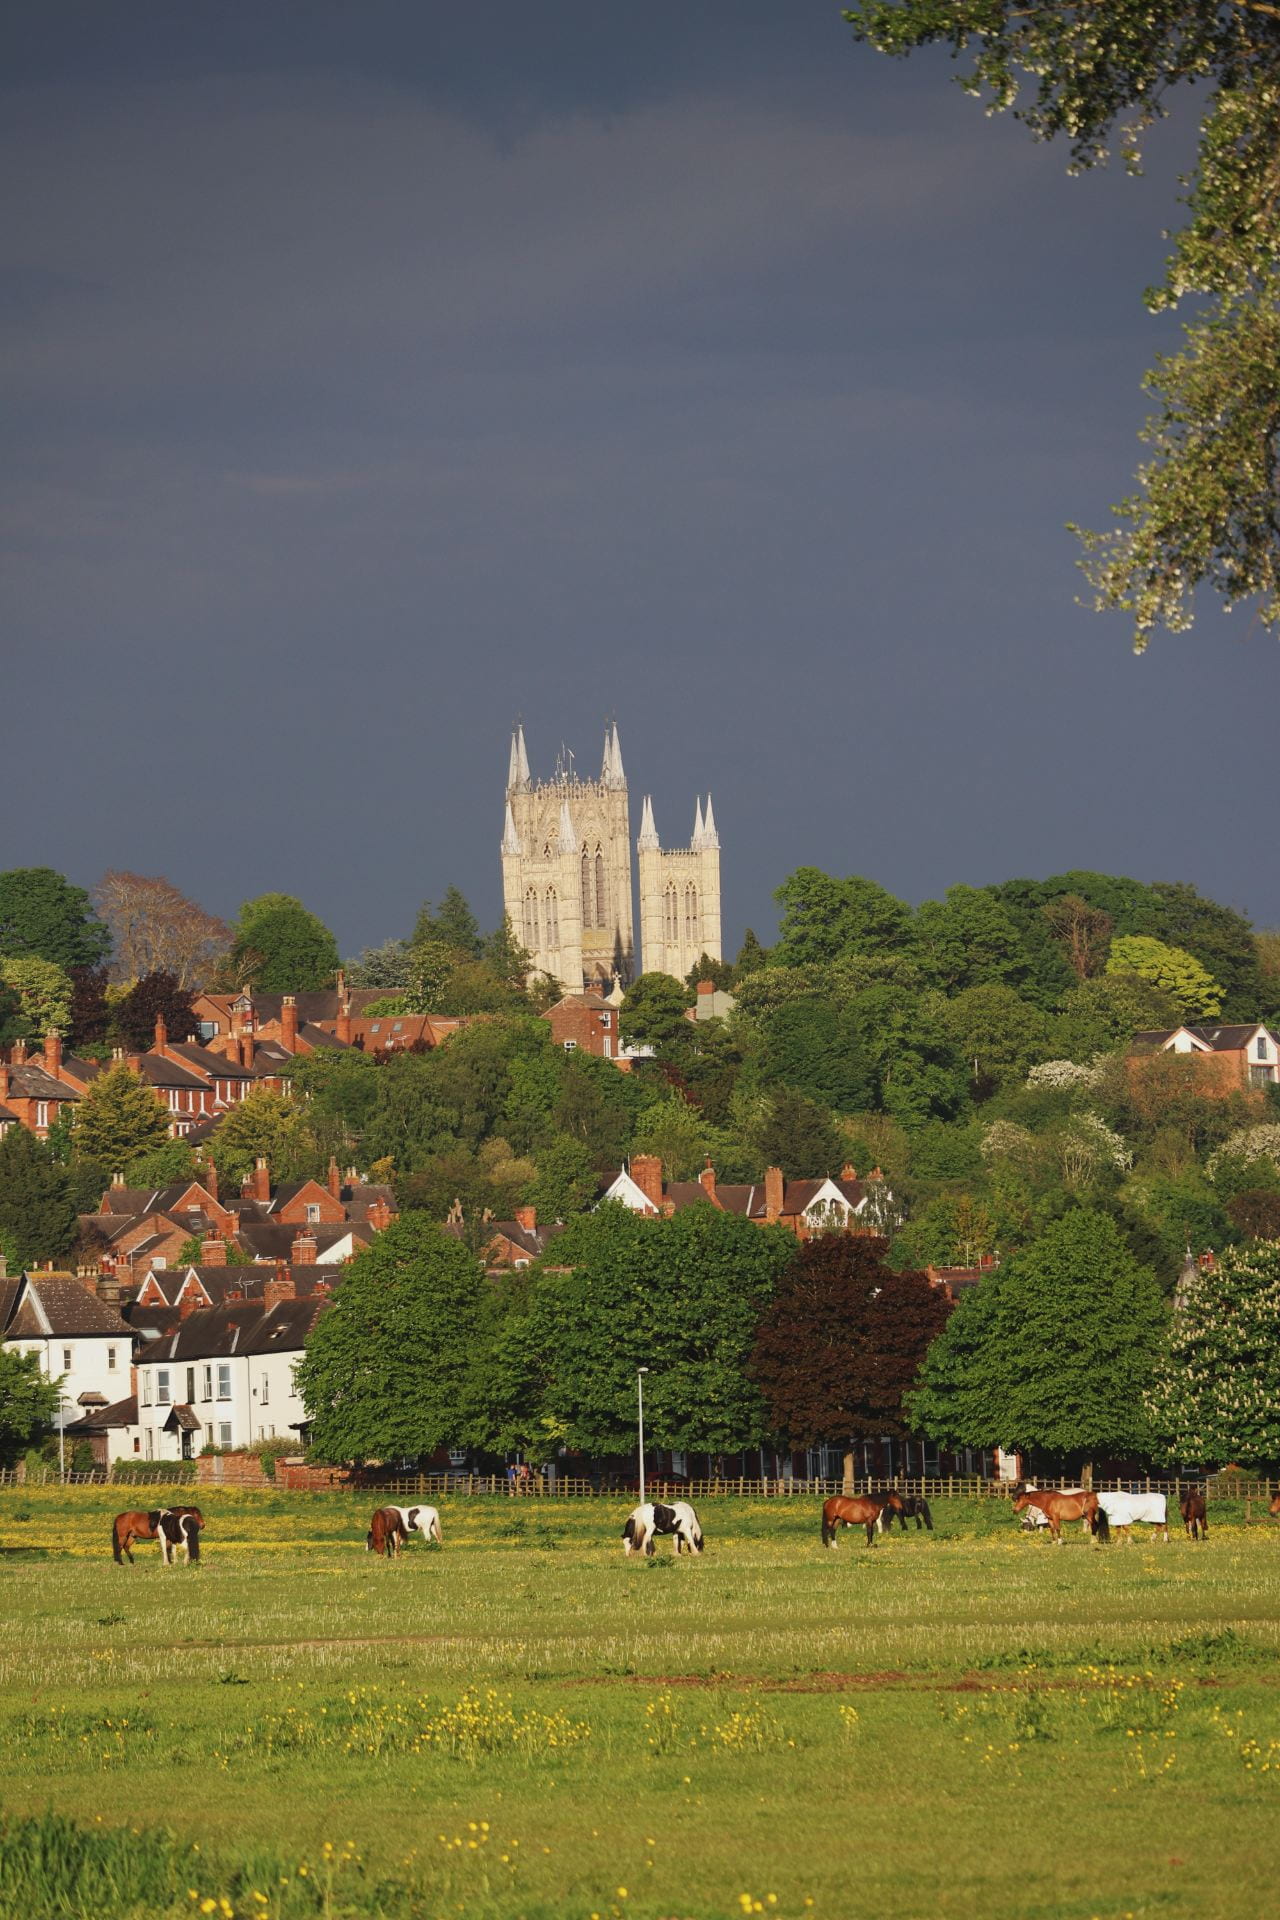 A cathedral against a grey stormy sky with a vast field of common land in the foreground. Horses and trees are there.